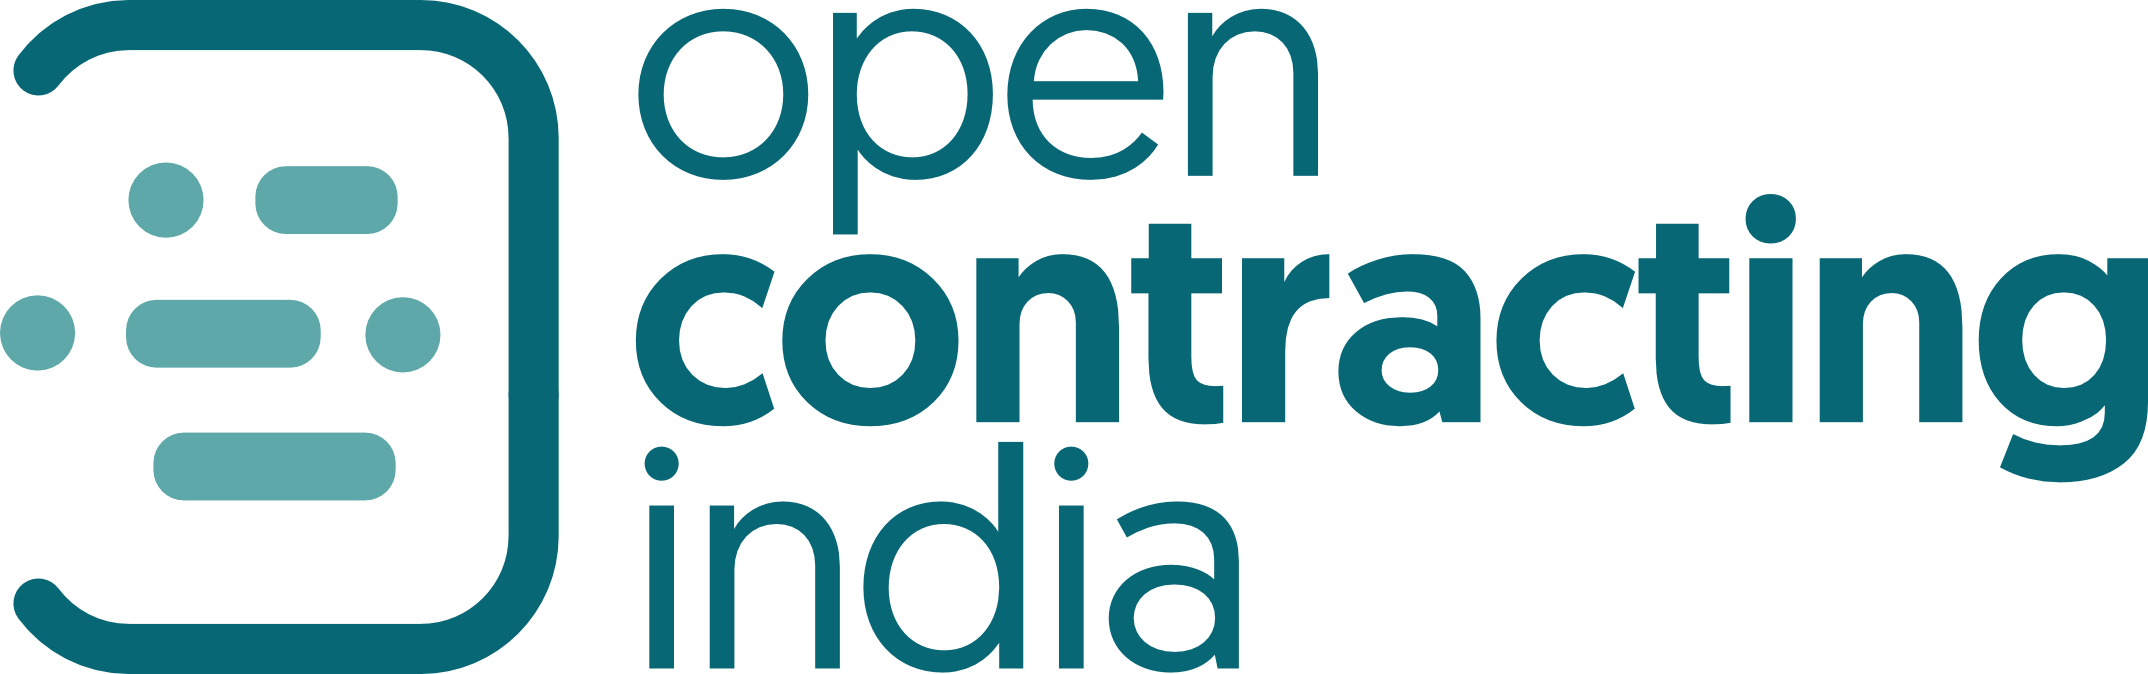 open-contracting-india